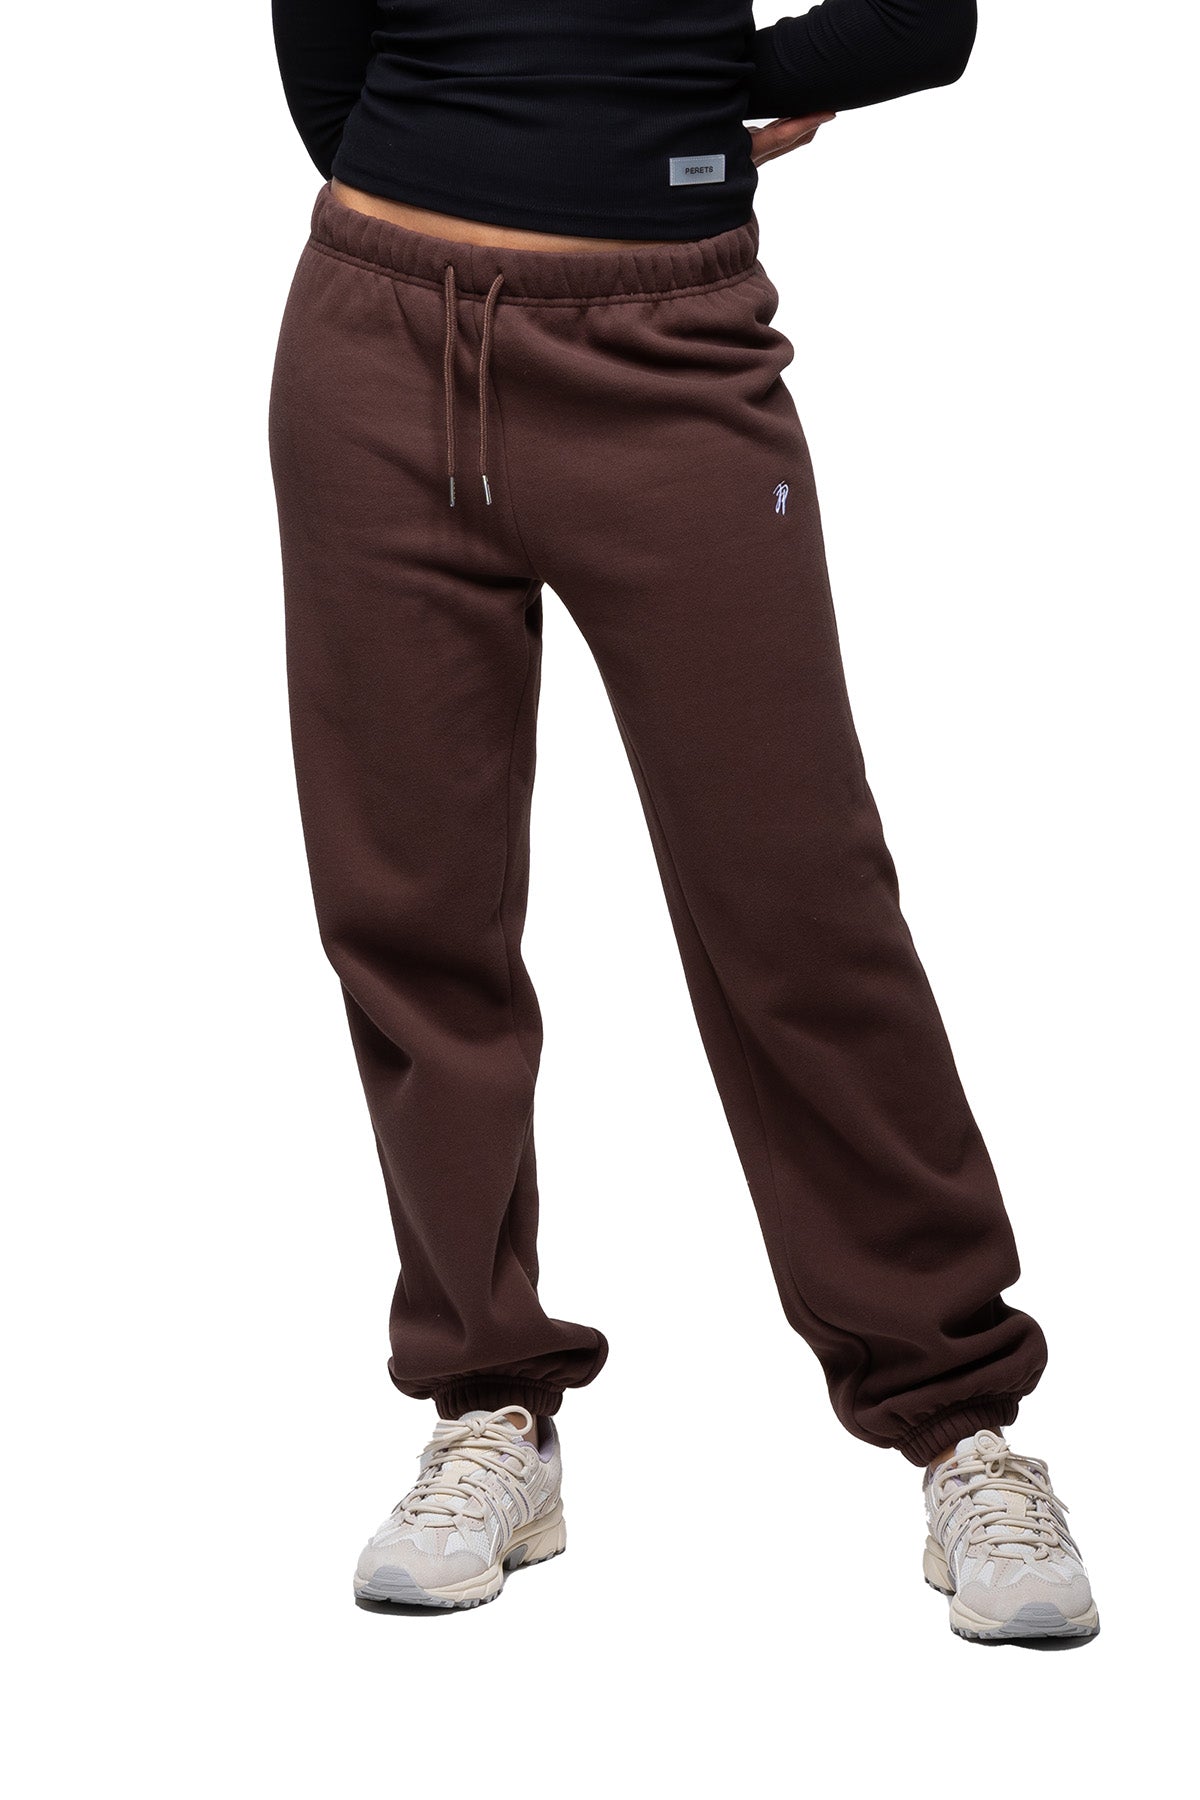 JILL YOGA YOUTH 'LIVE IN' JOGGER